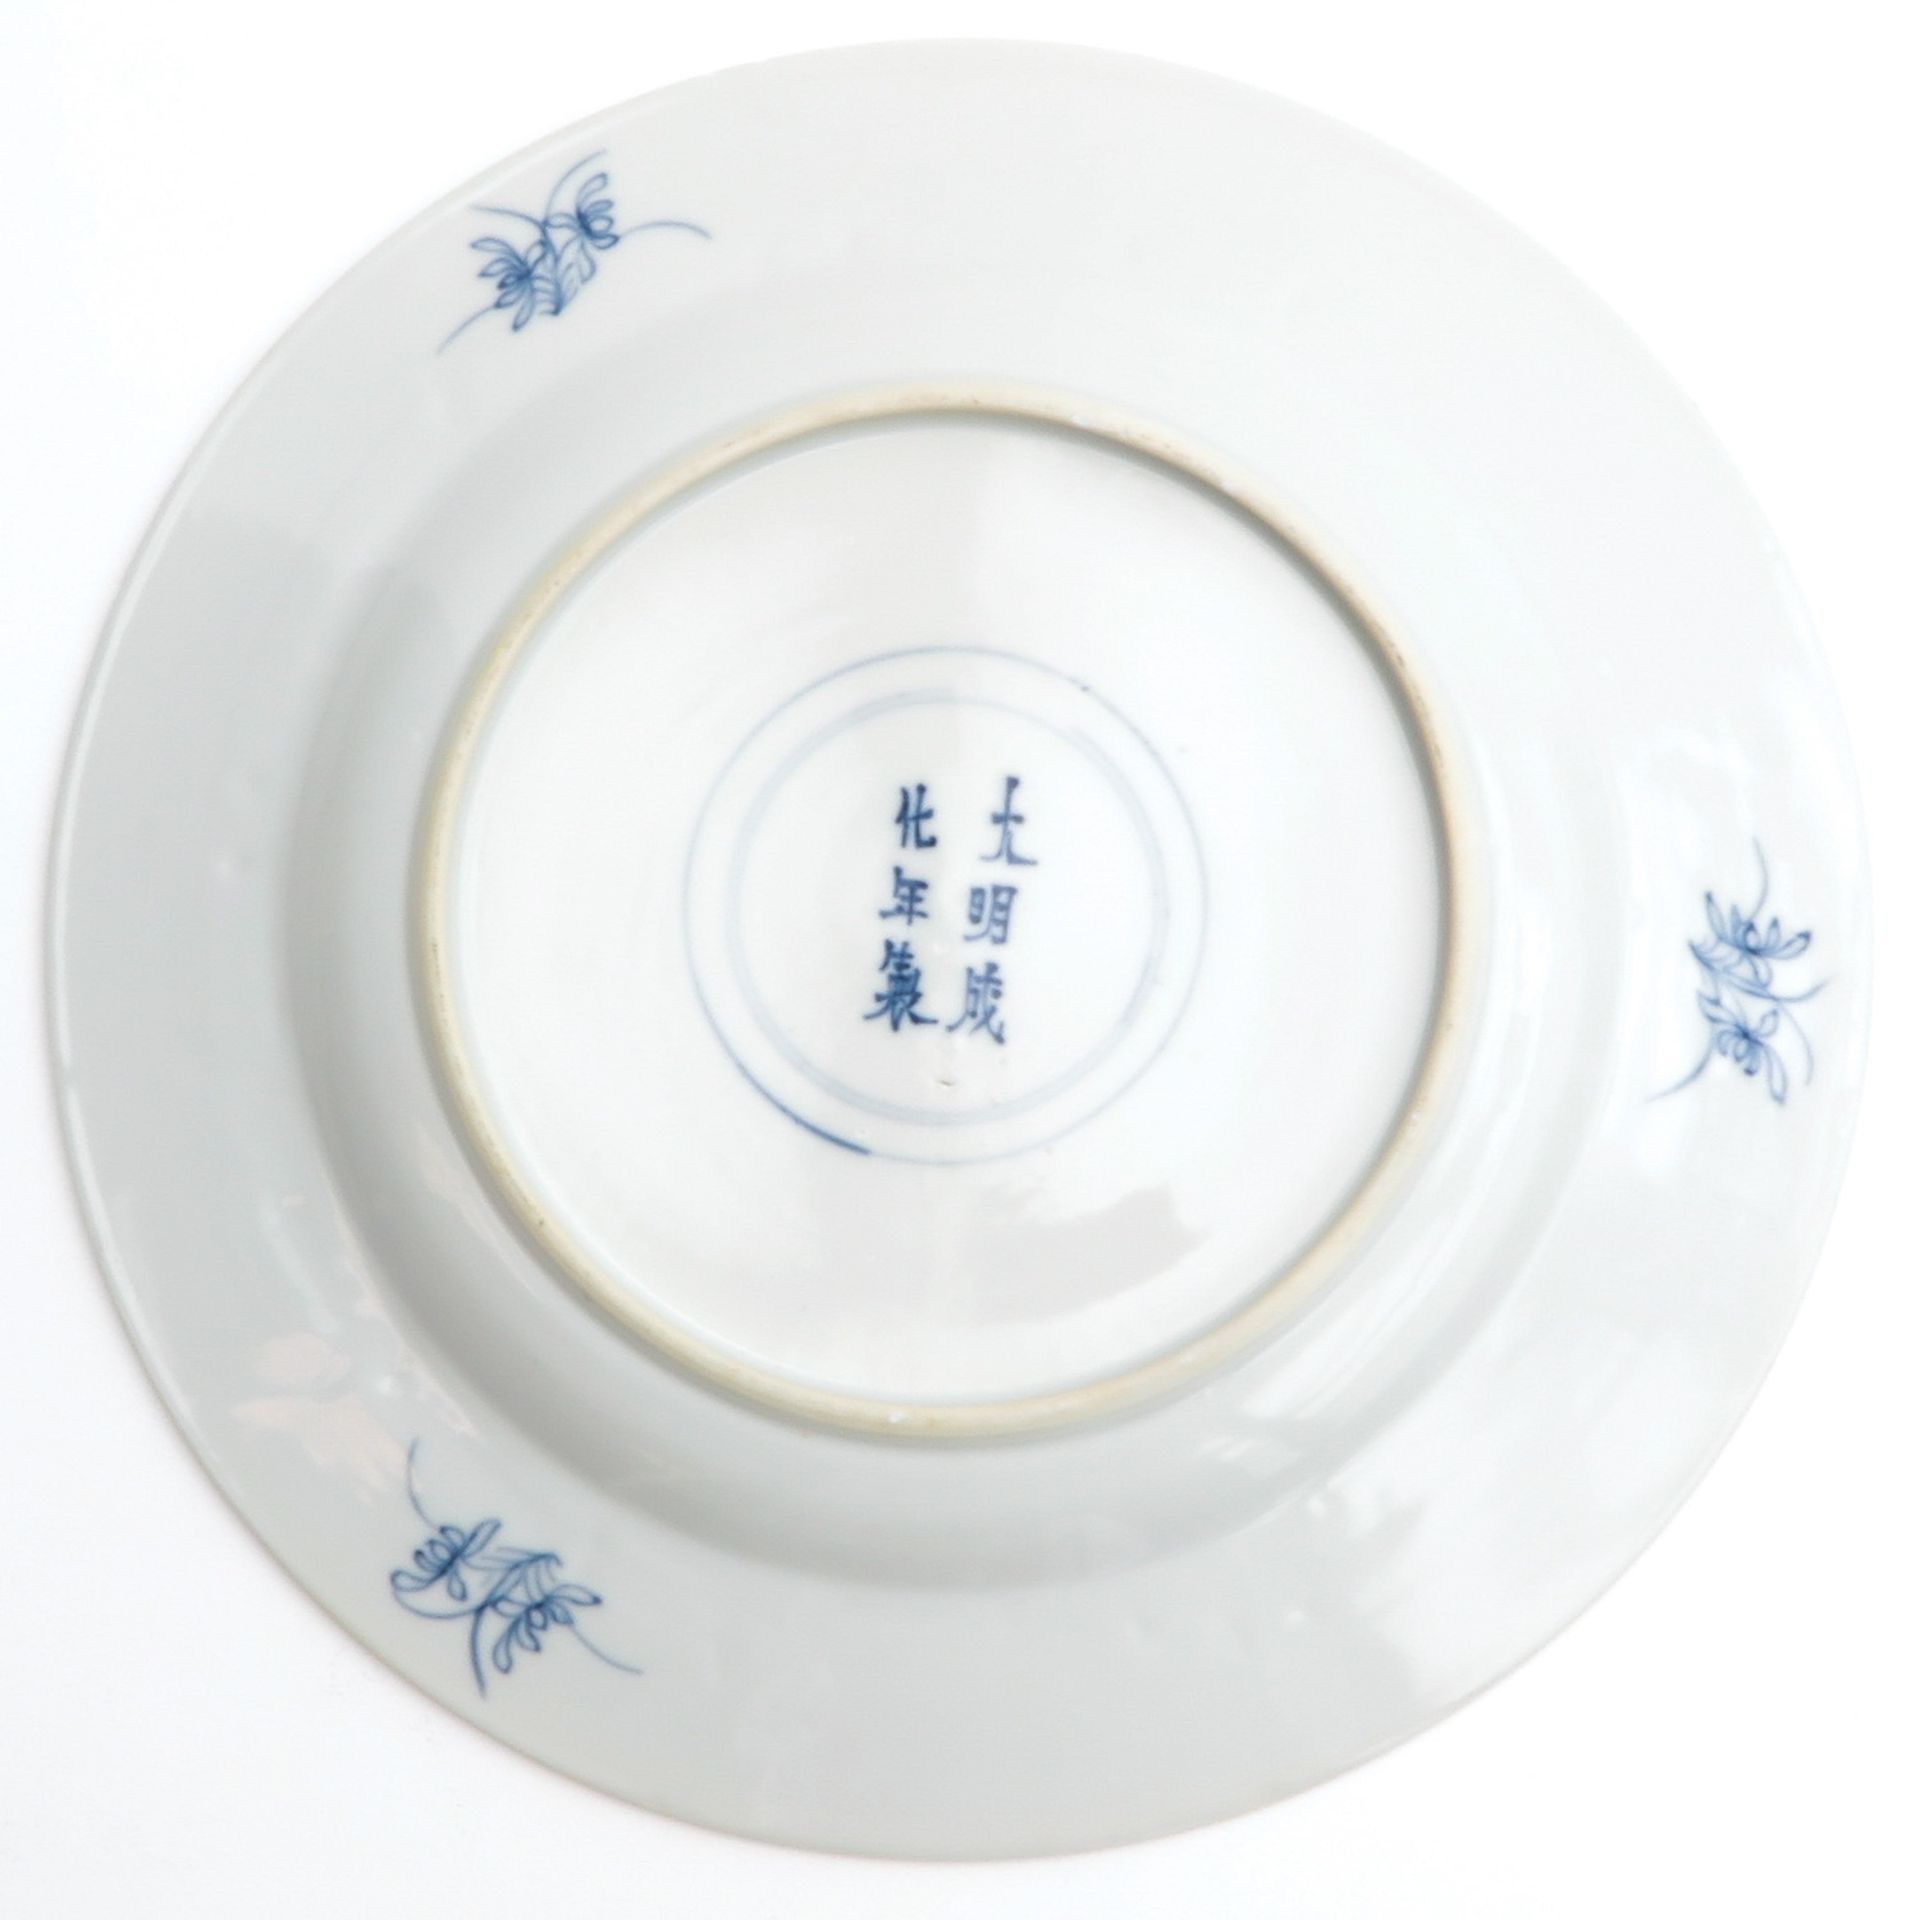 A Blue and White Plate - Image 2 of 8